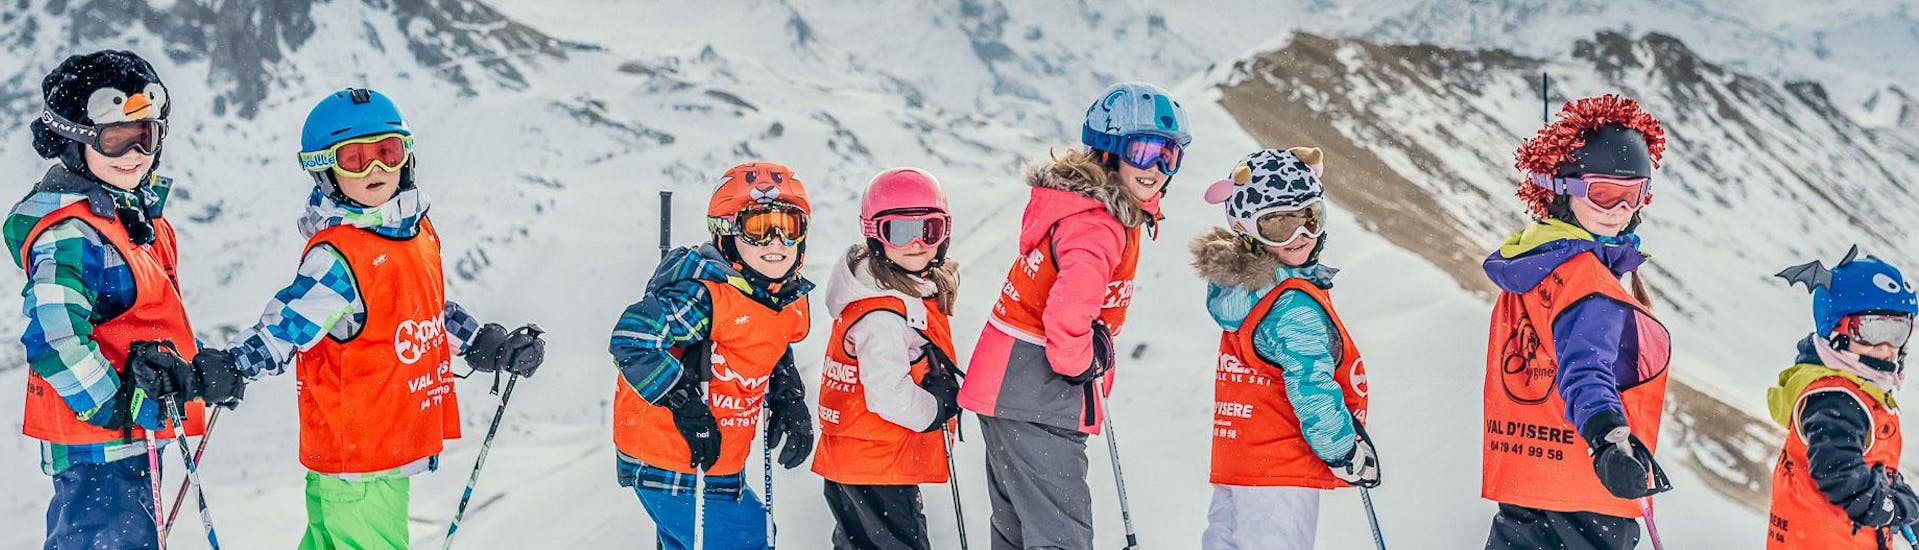 Kids are doing Kids Ski Lessons (3-13 y.) for All Levels - Low Season with our partner Starski Grand Bornand.